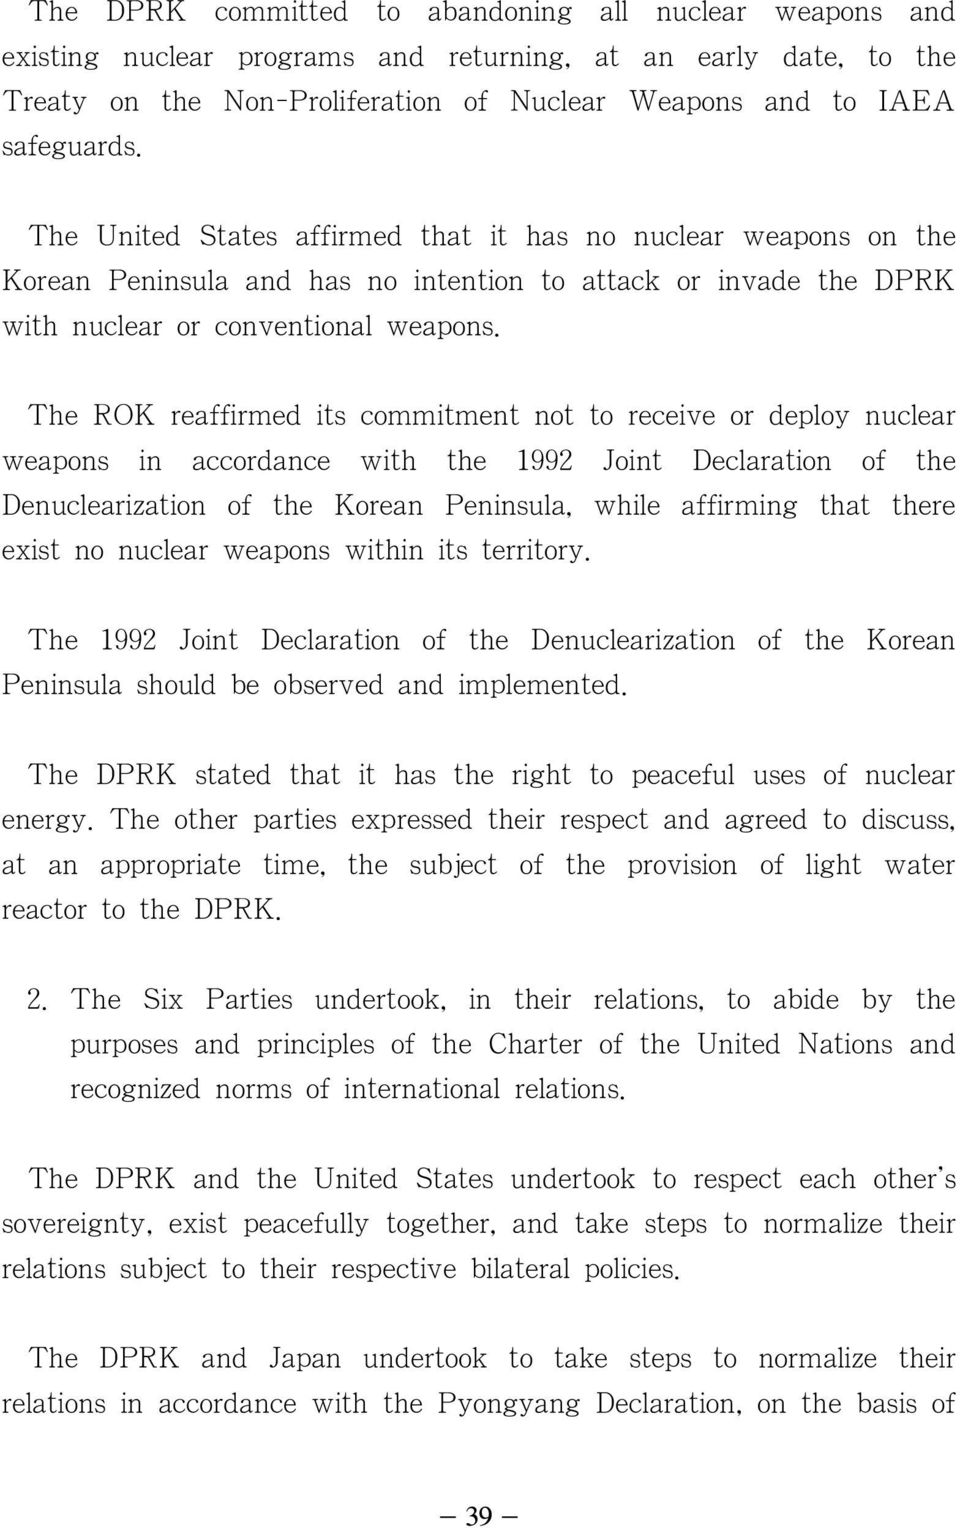 The ROK reaffirmed its commitment not to receive or deploy nuclear weapons in accordance with the 1992 Joint Declaration of the Denuclearization of the Korean Peninsula, while affirming that there